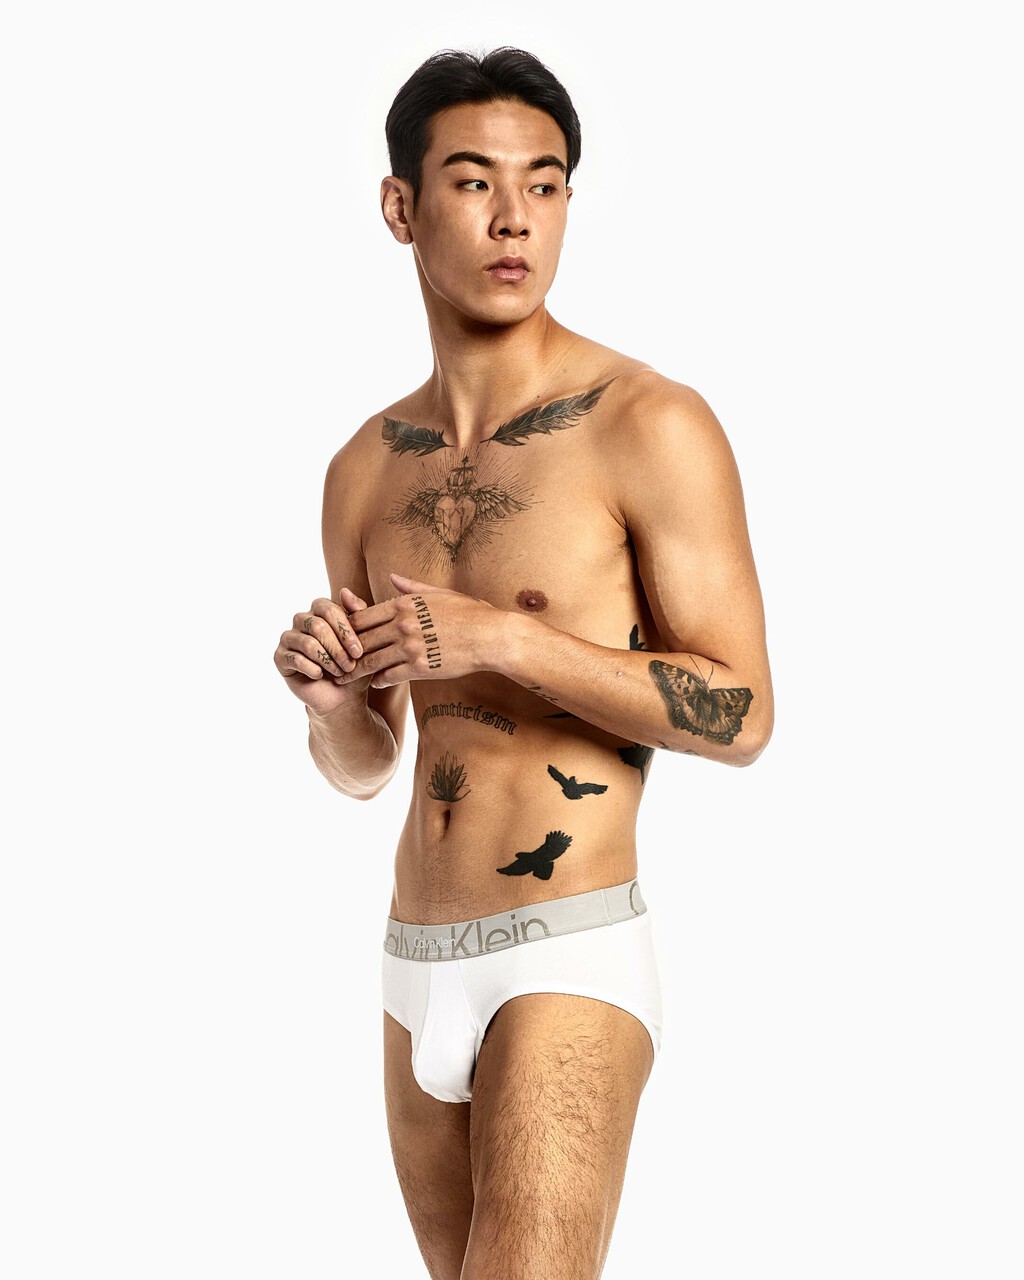 EMBOSSED ICON COTTON HIPSTER BRIEFS, Classic White, hi-res